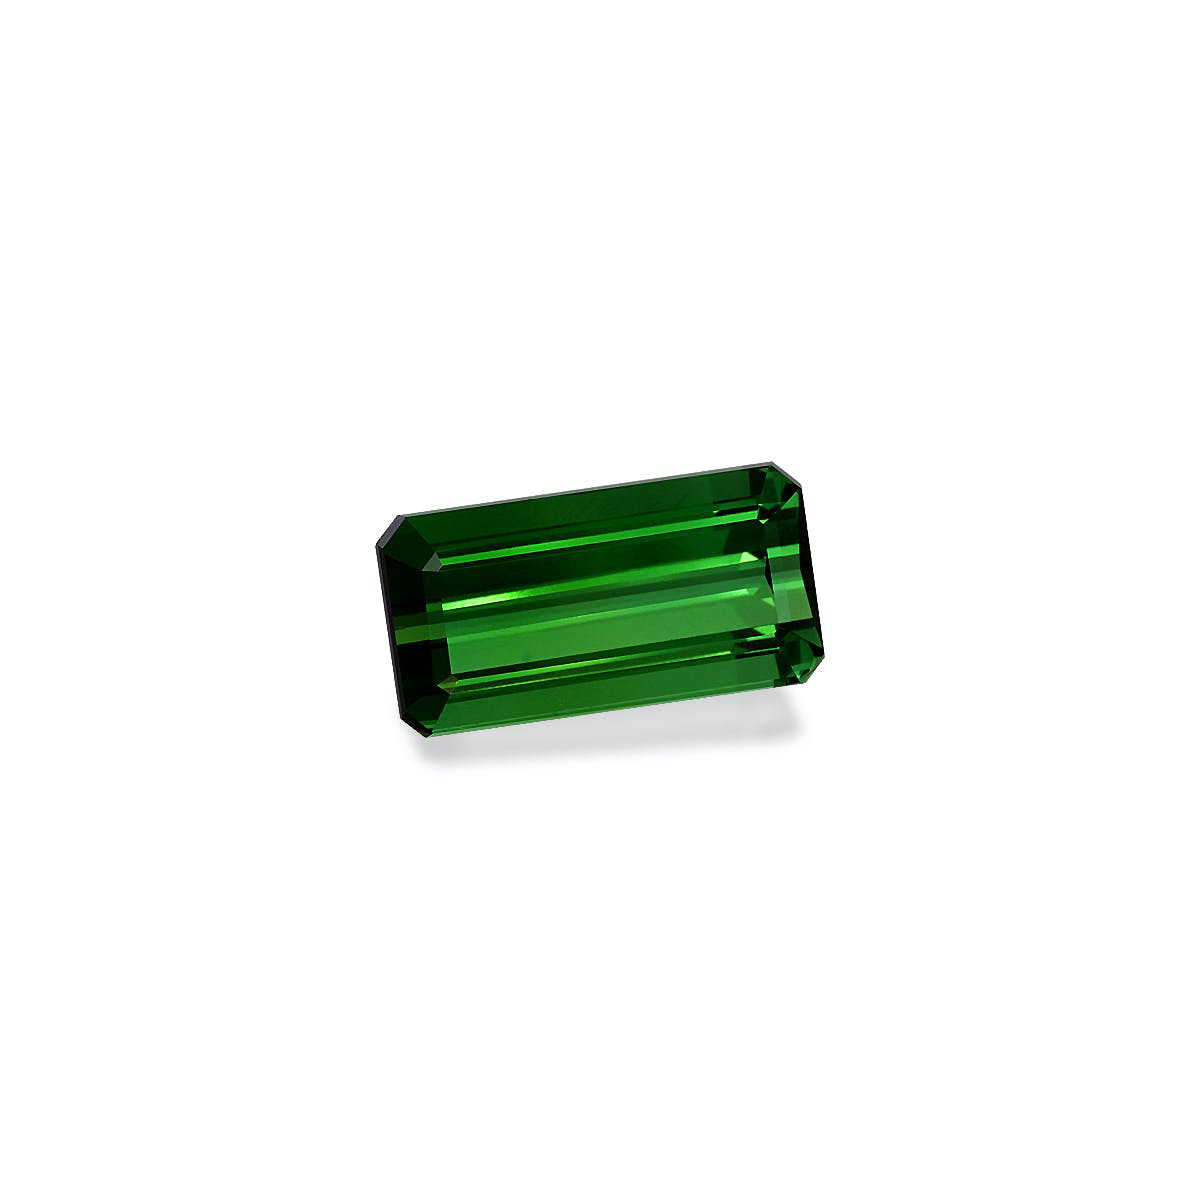 Picture of Vivid Green Tourmaline 8.54ct (TG1387)